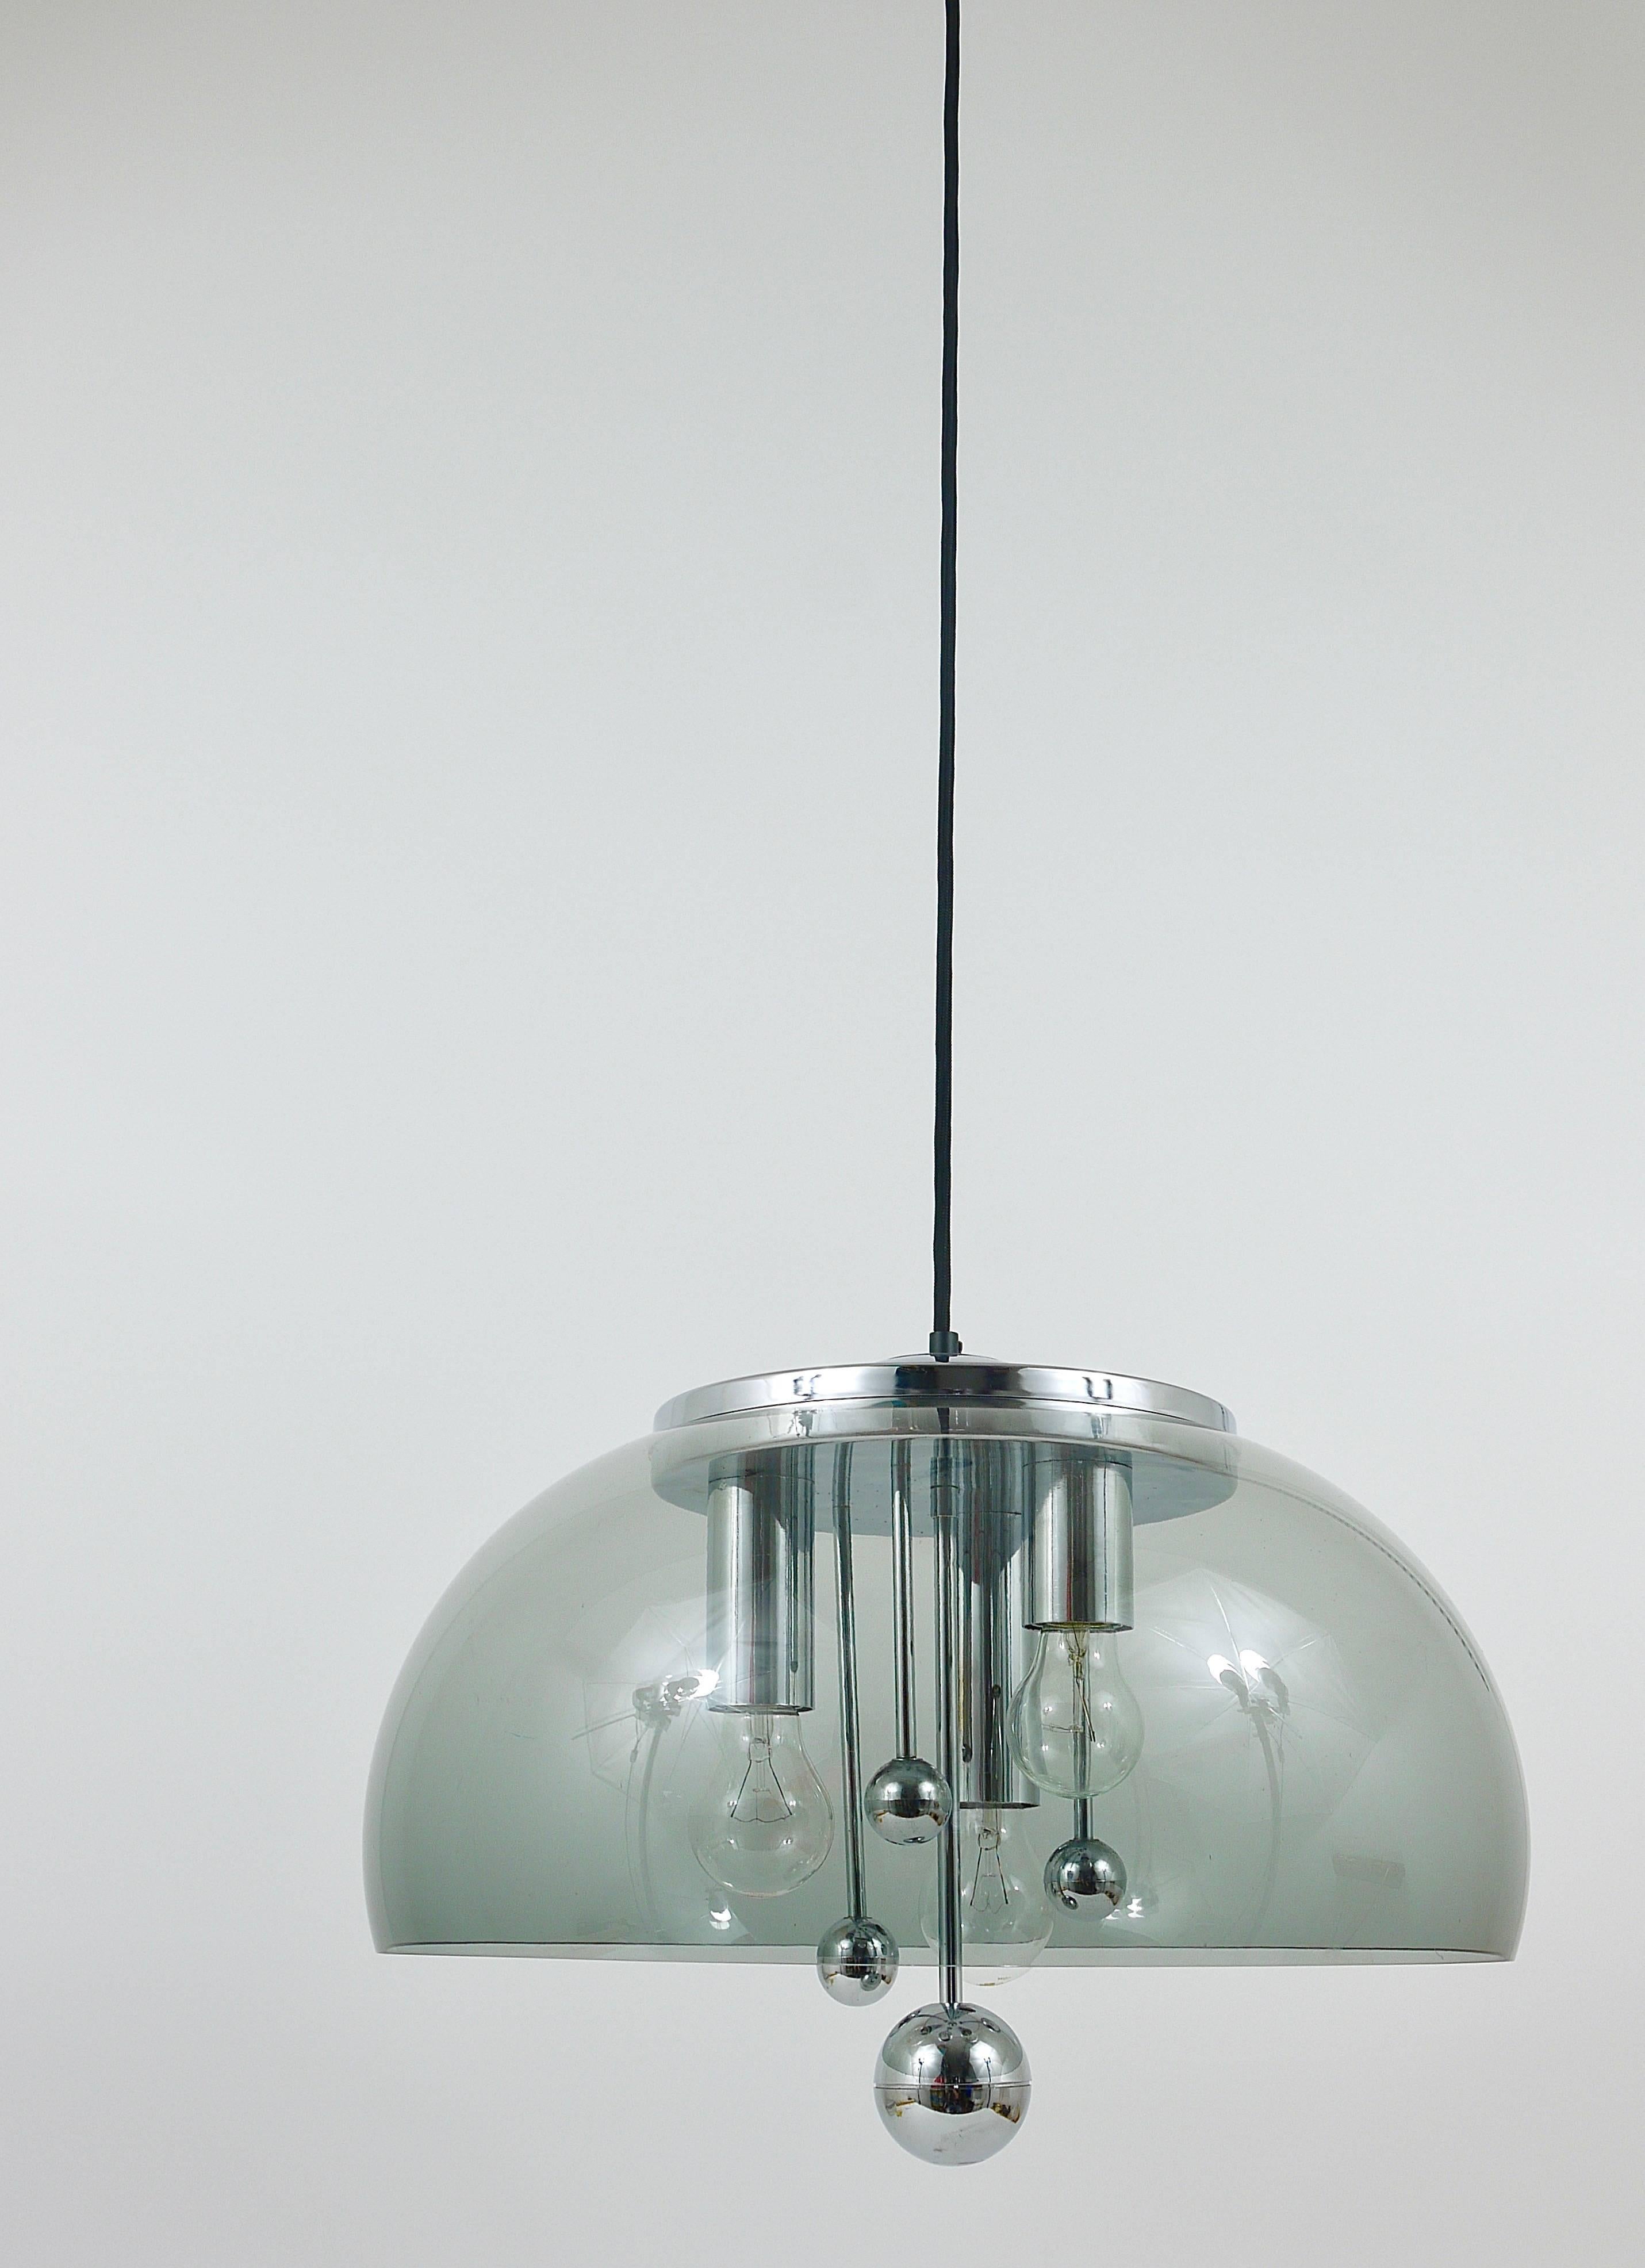 Midcentury Space Age Globe Pendant Lamp with Chromed Spheres, Germany, 1970s For Sale 2